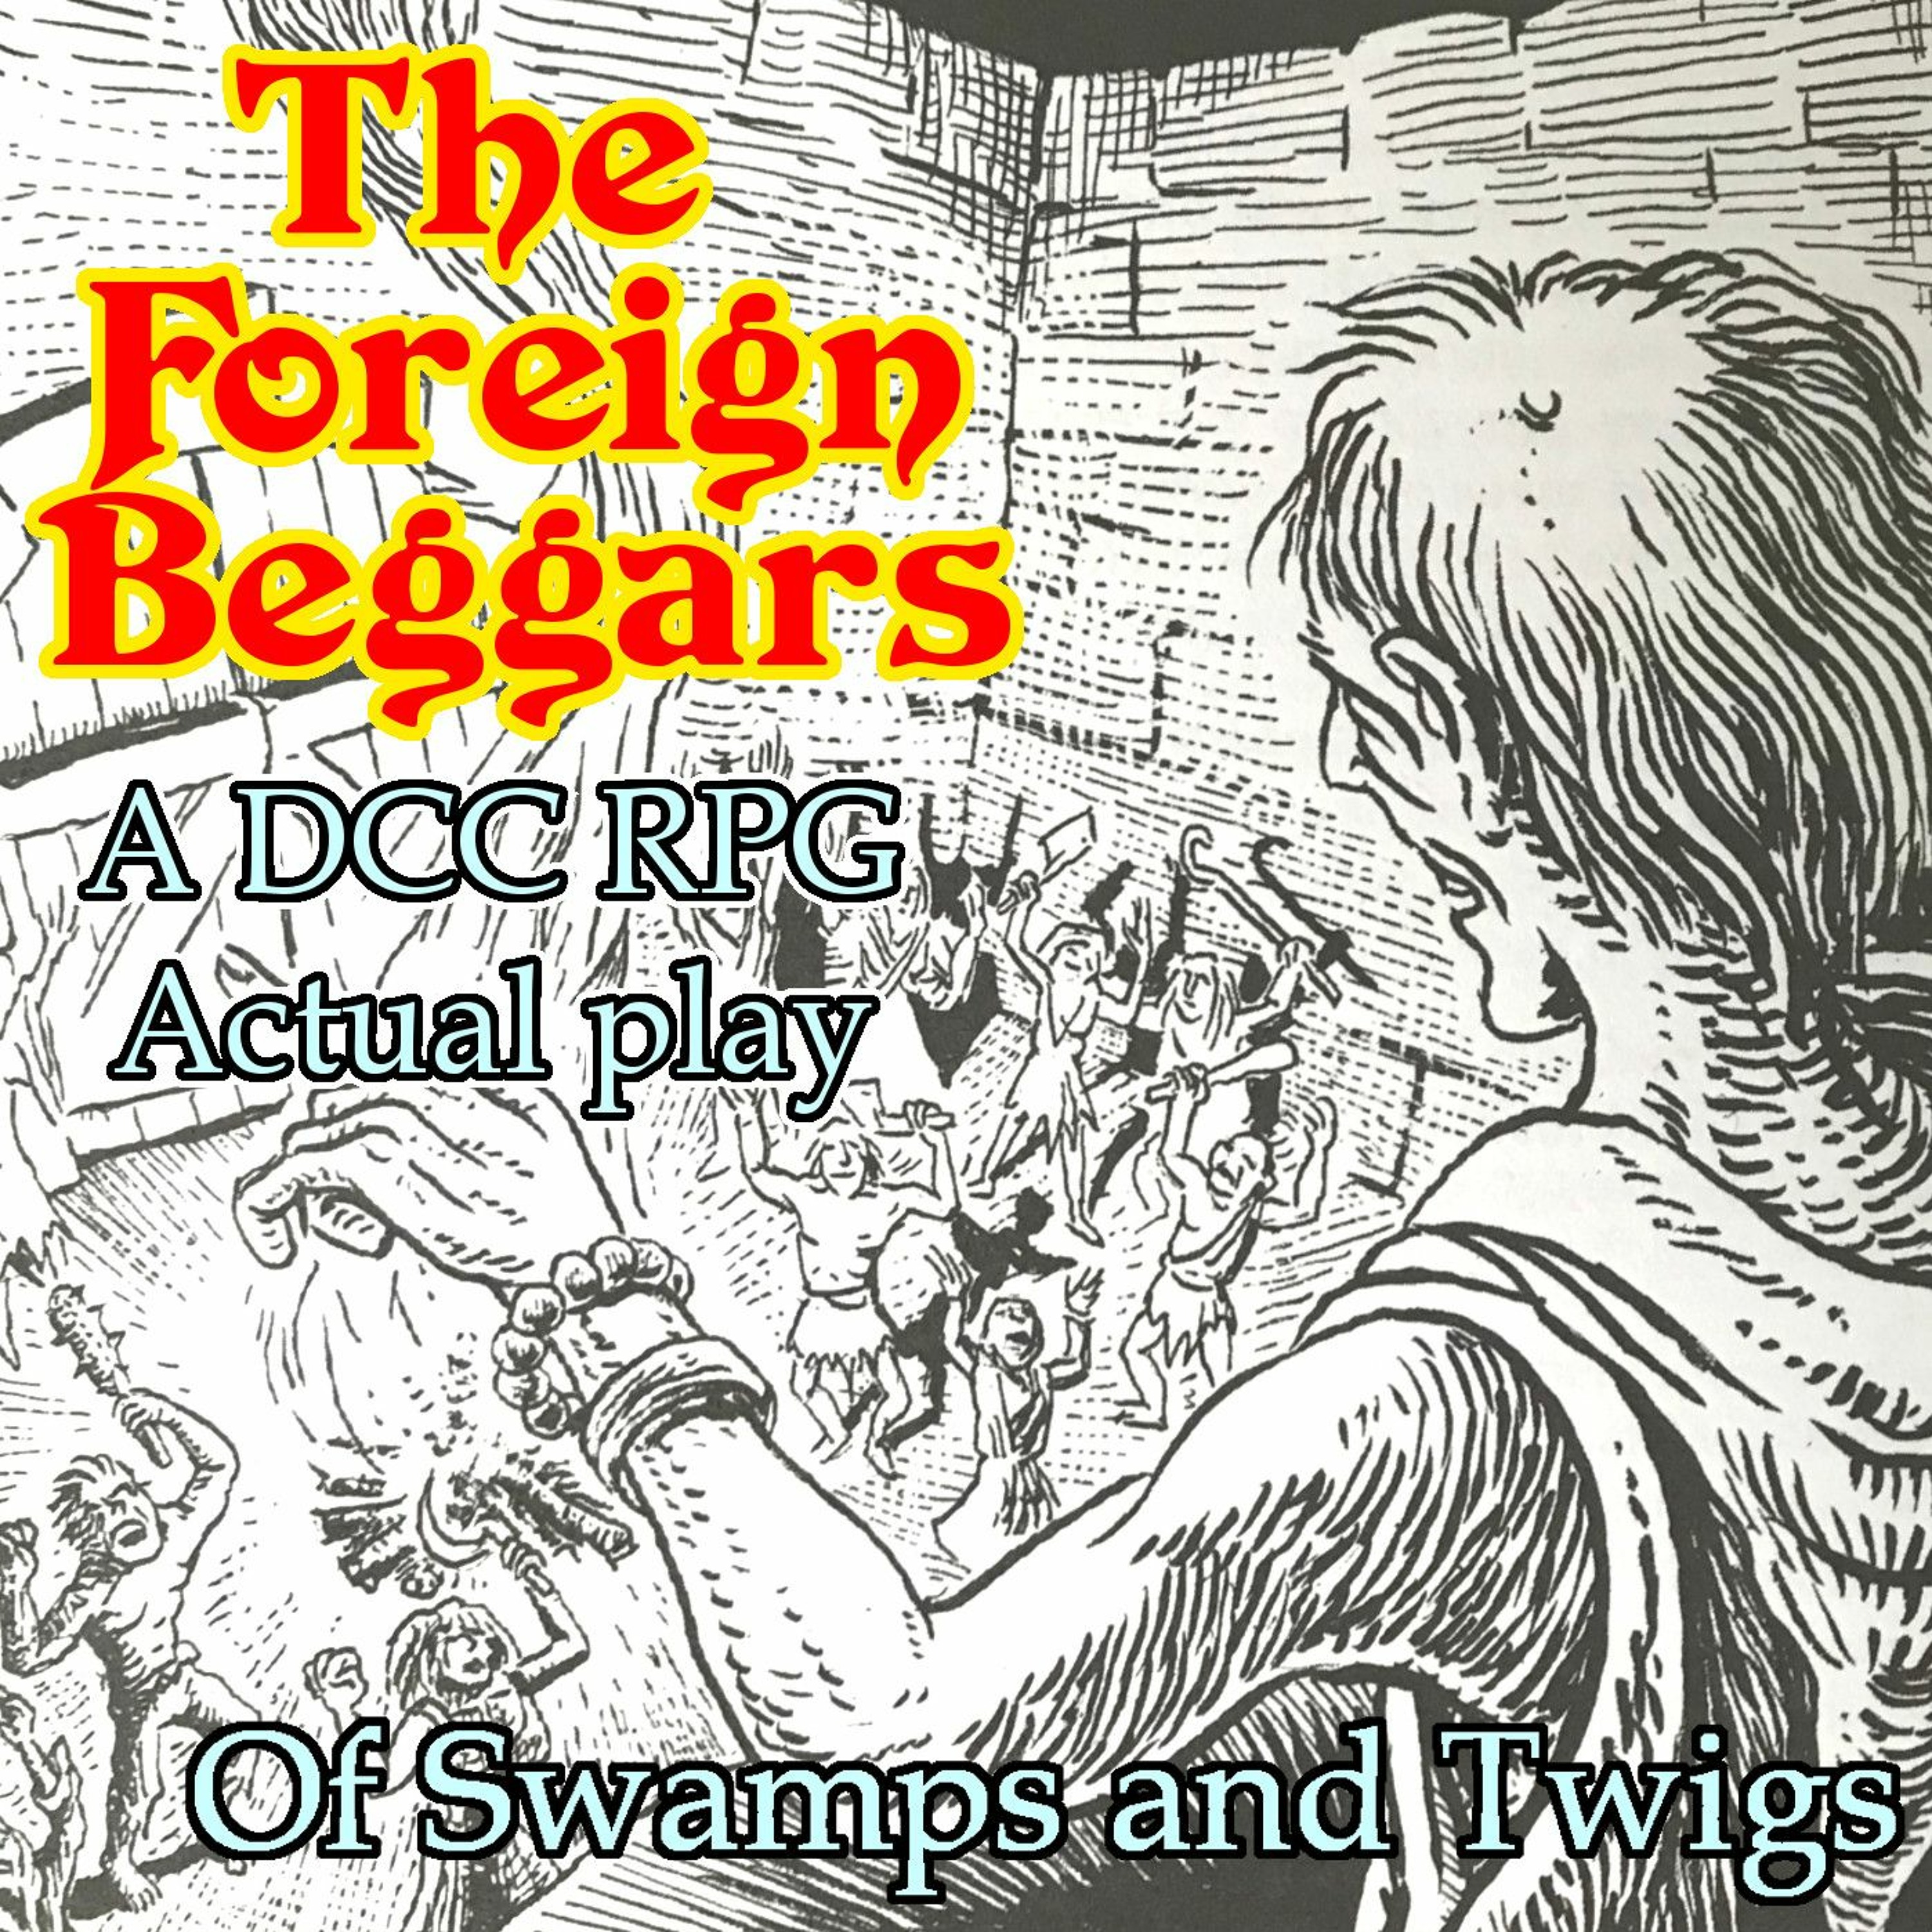 The Foreign Beggars 03 - Of Swamps & Twigs (DCC RPG Actual Play)